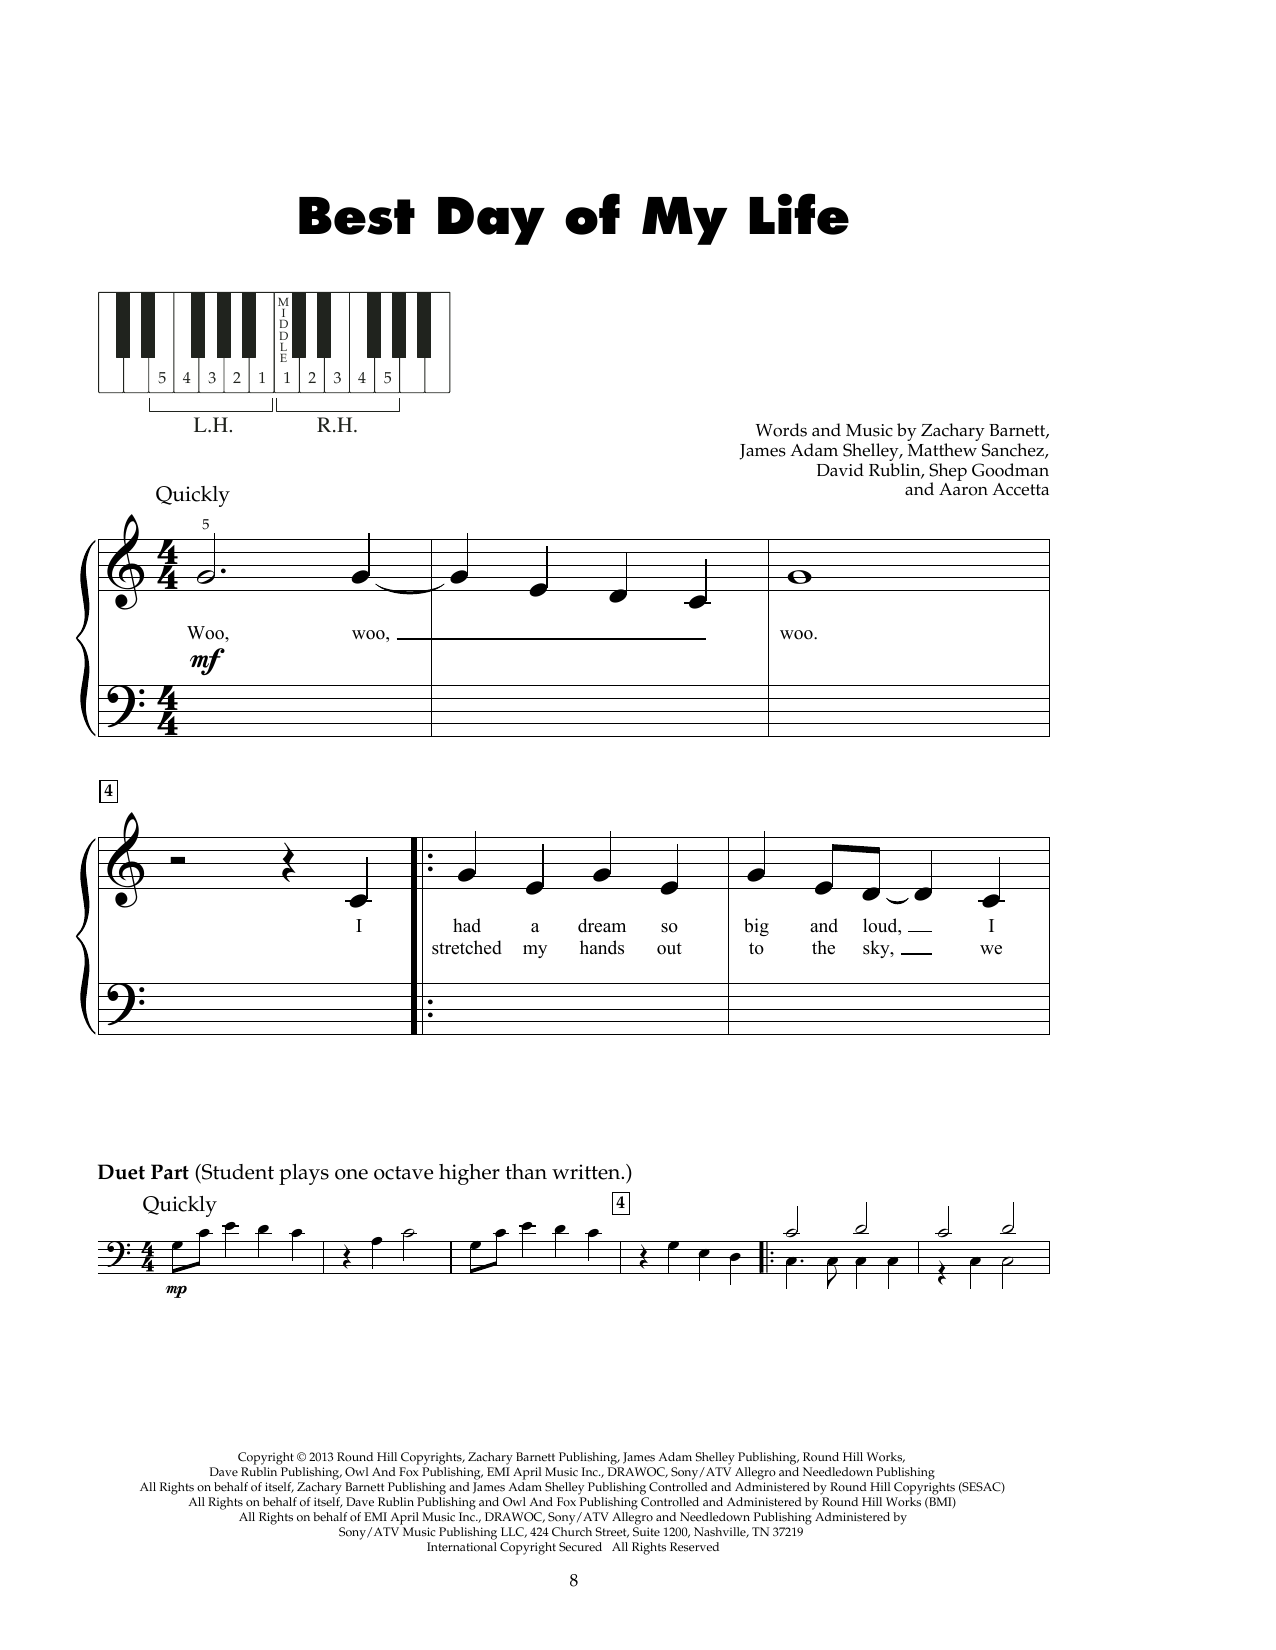 Download American Authors Best Day Of My Life Sheet Music